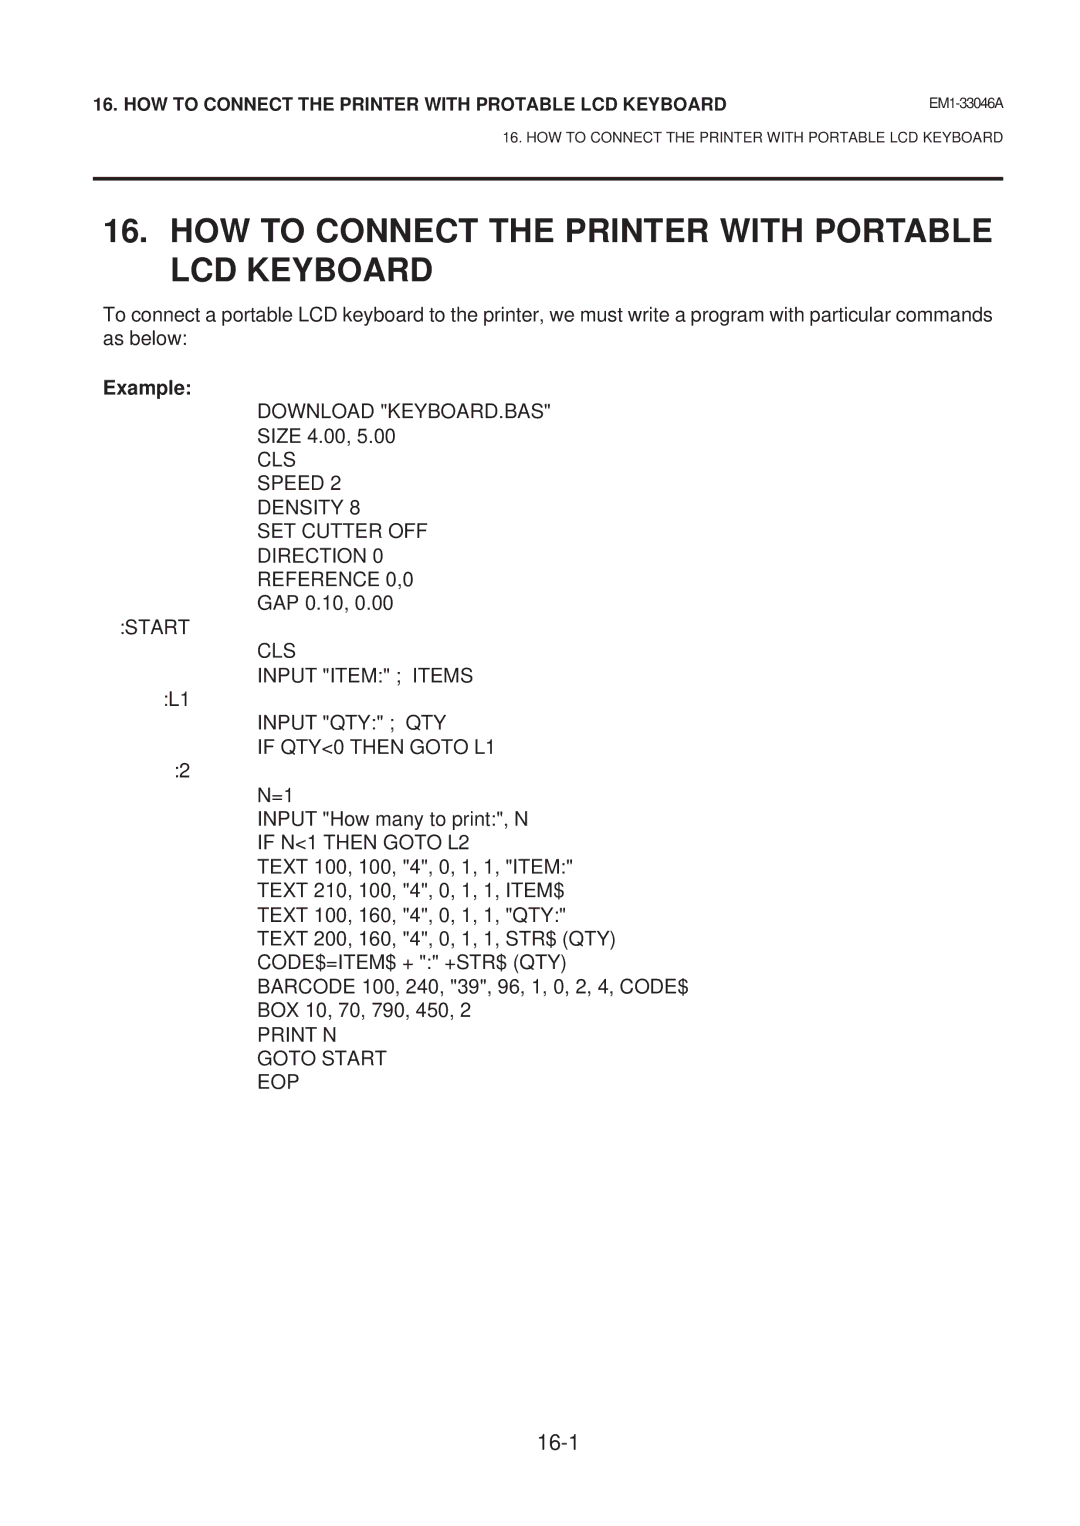 Toshiba B-442-QP, EM1-33046AE owner manual HOW to Connect the Printer with Portable LCD Keyboard, Example 